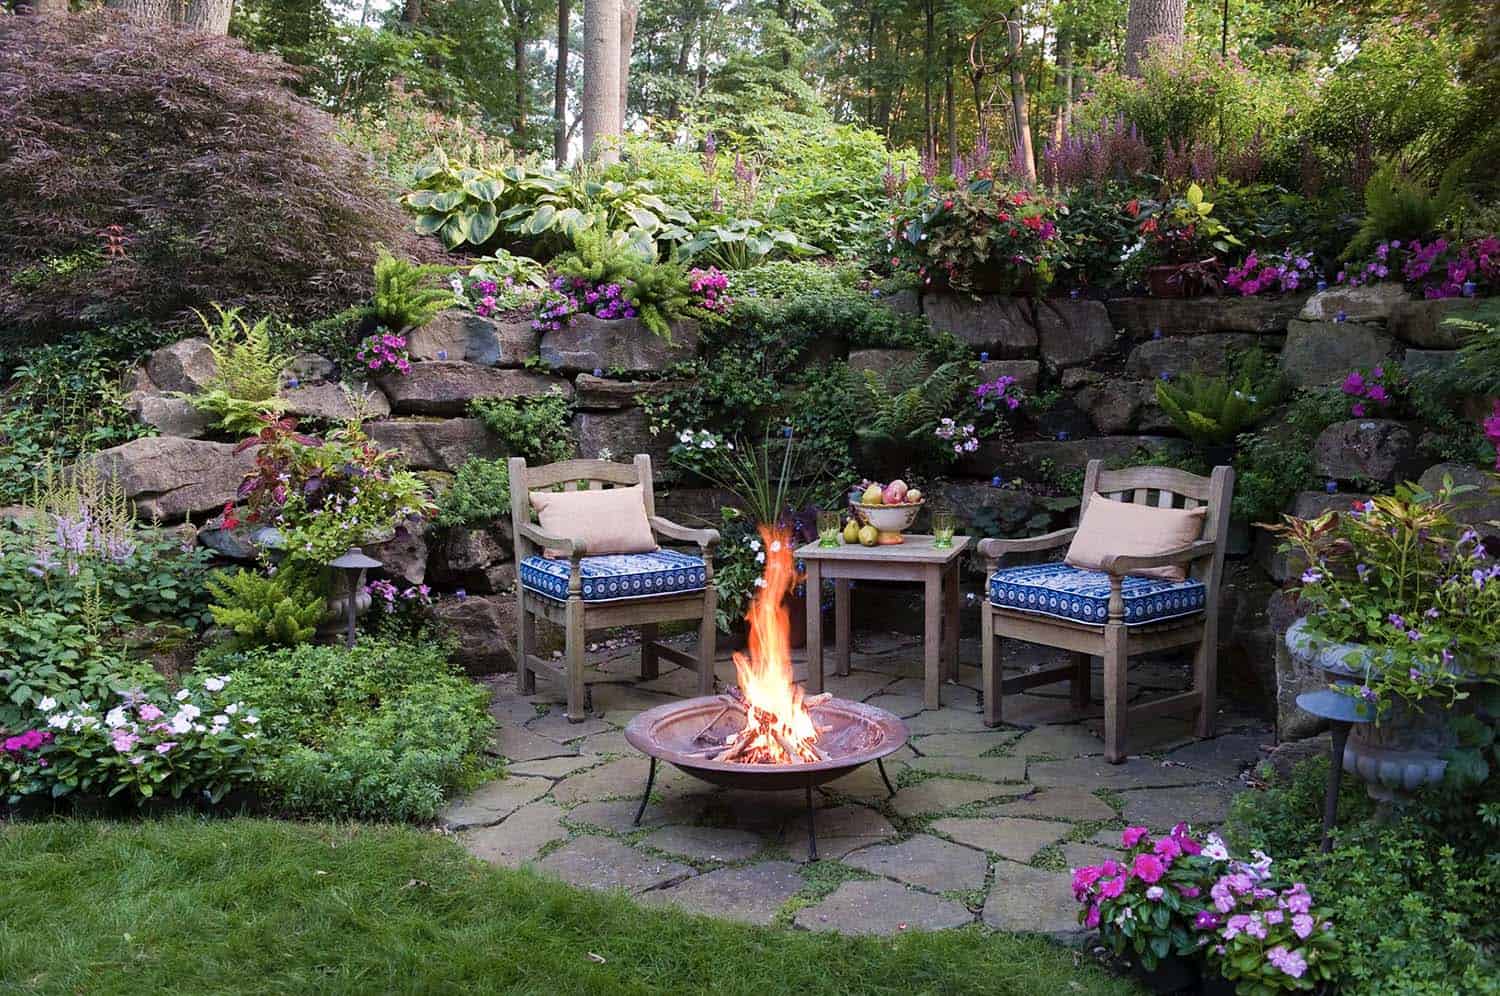 grotto-garden-with-a-fire-feature